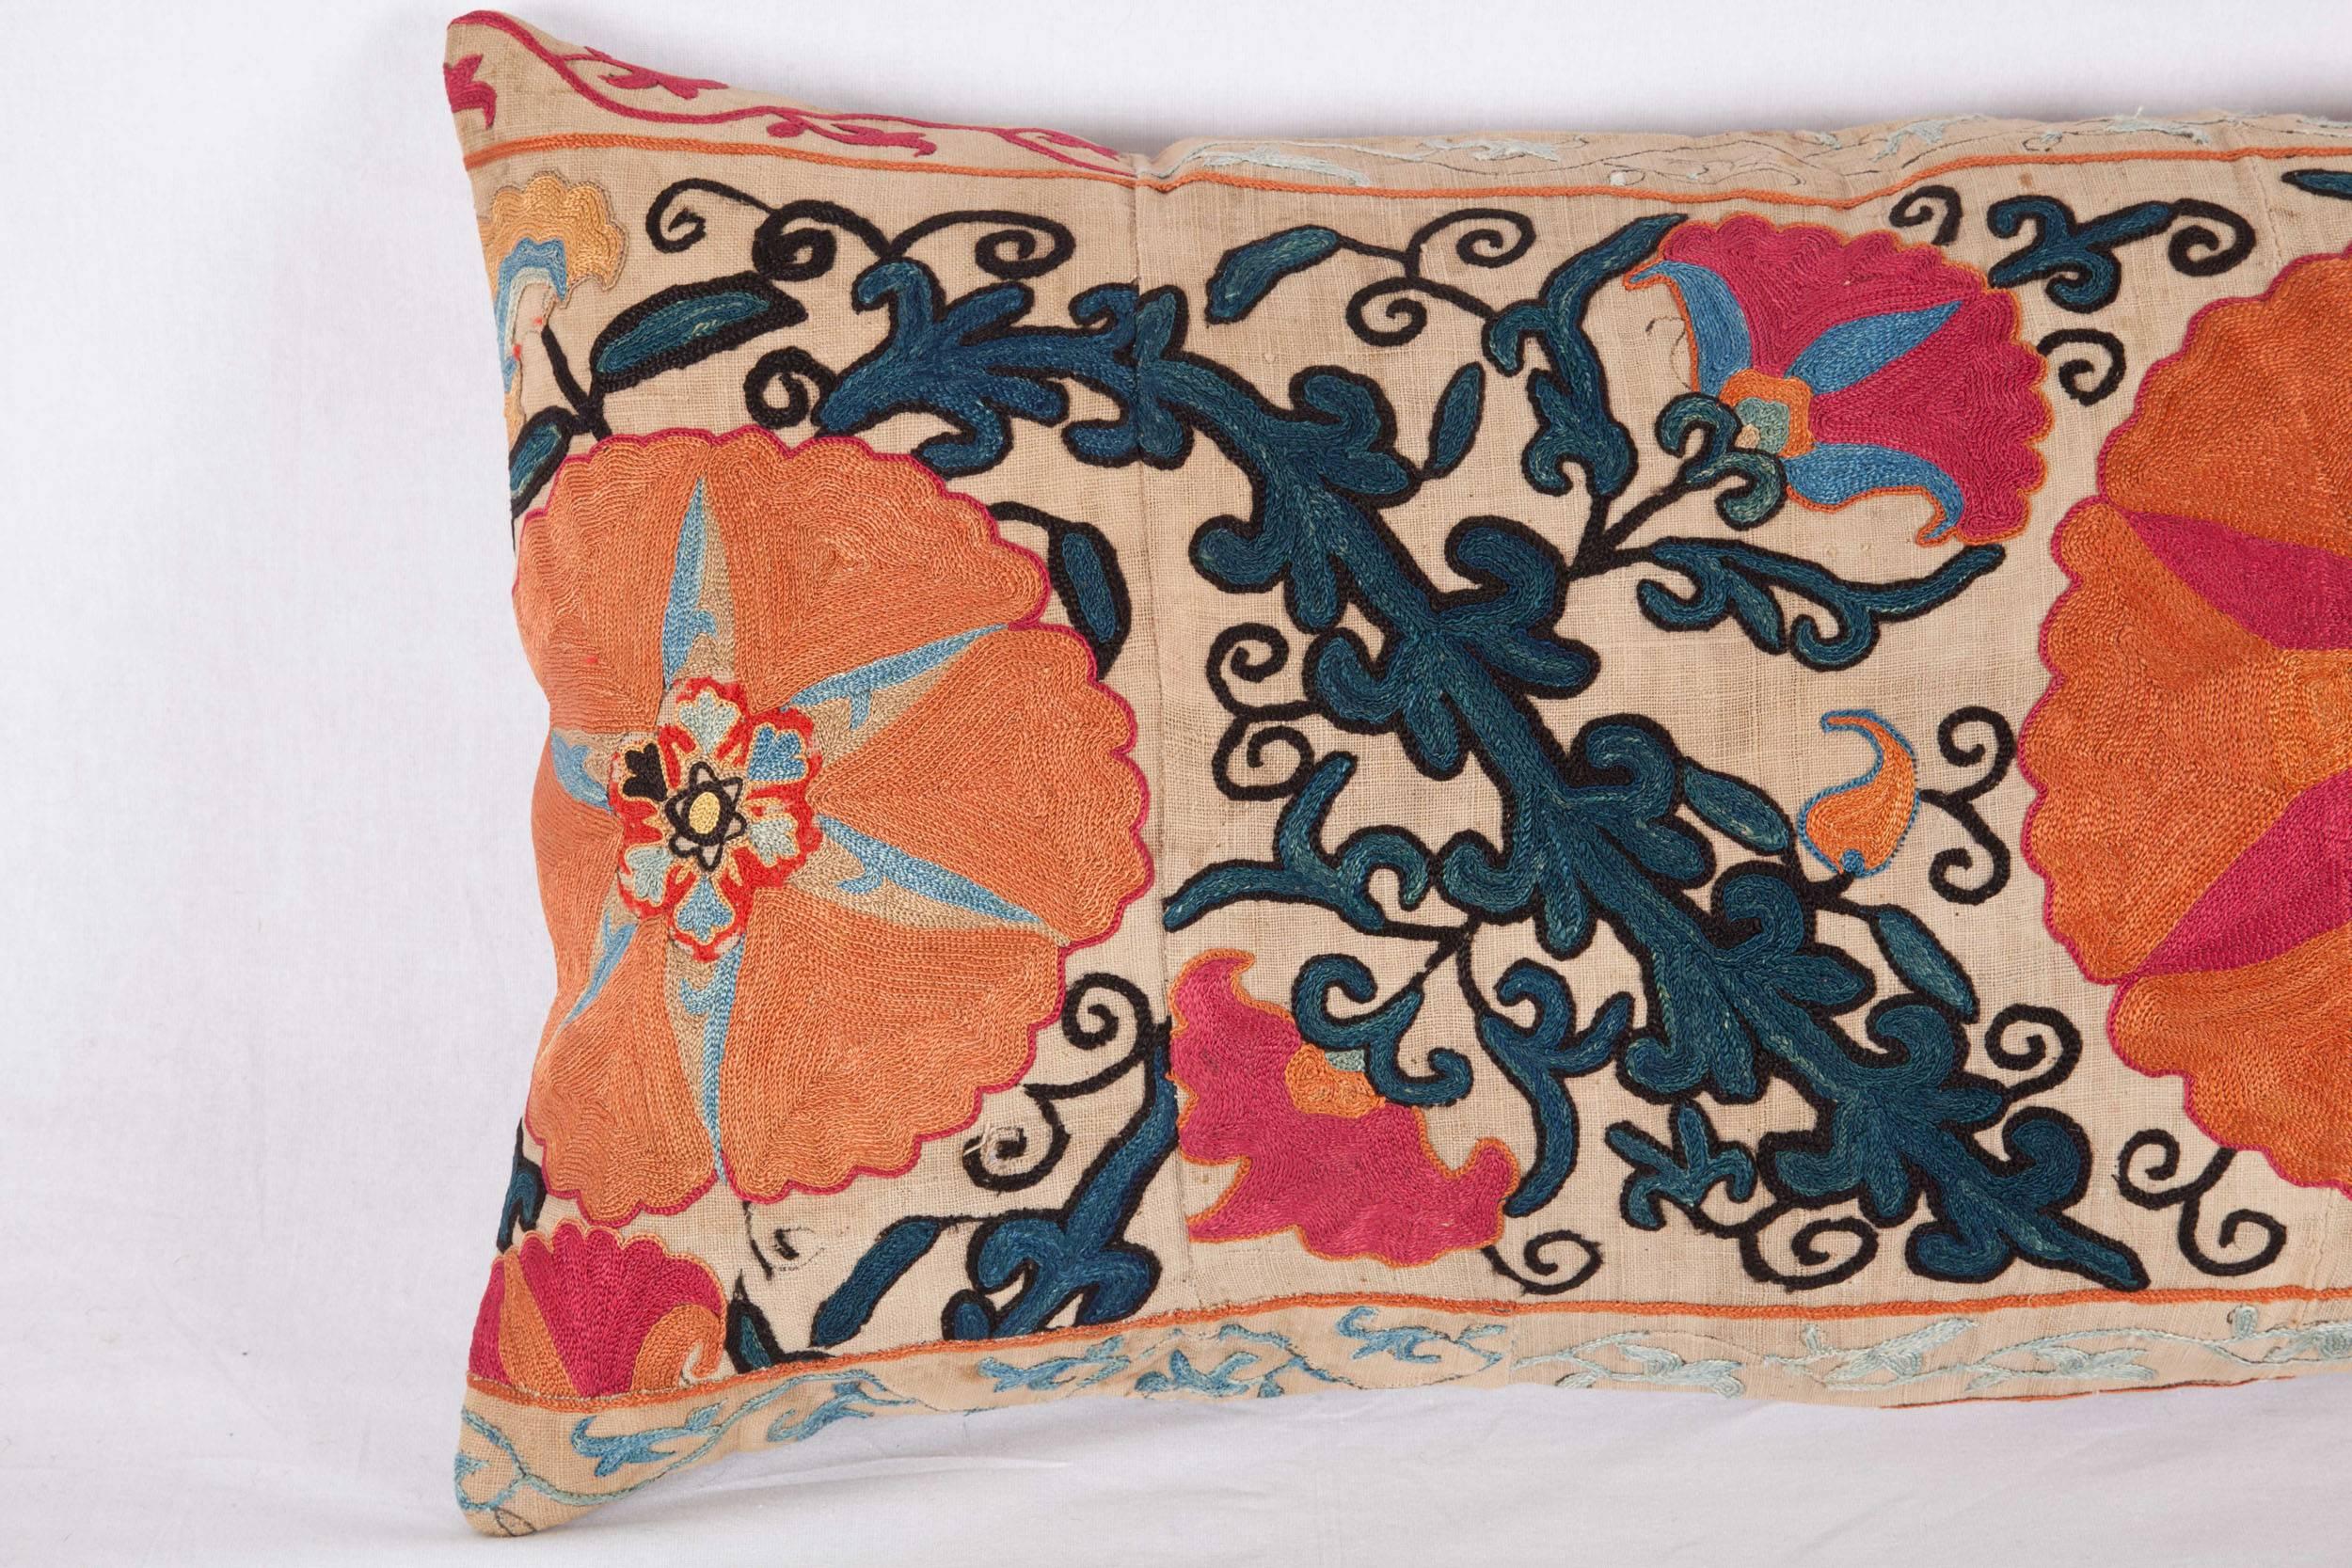 Embroidered Pillow Fashioned from an Antique 19th Century Uzbek Suzani